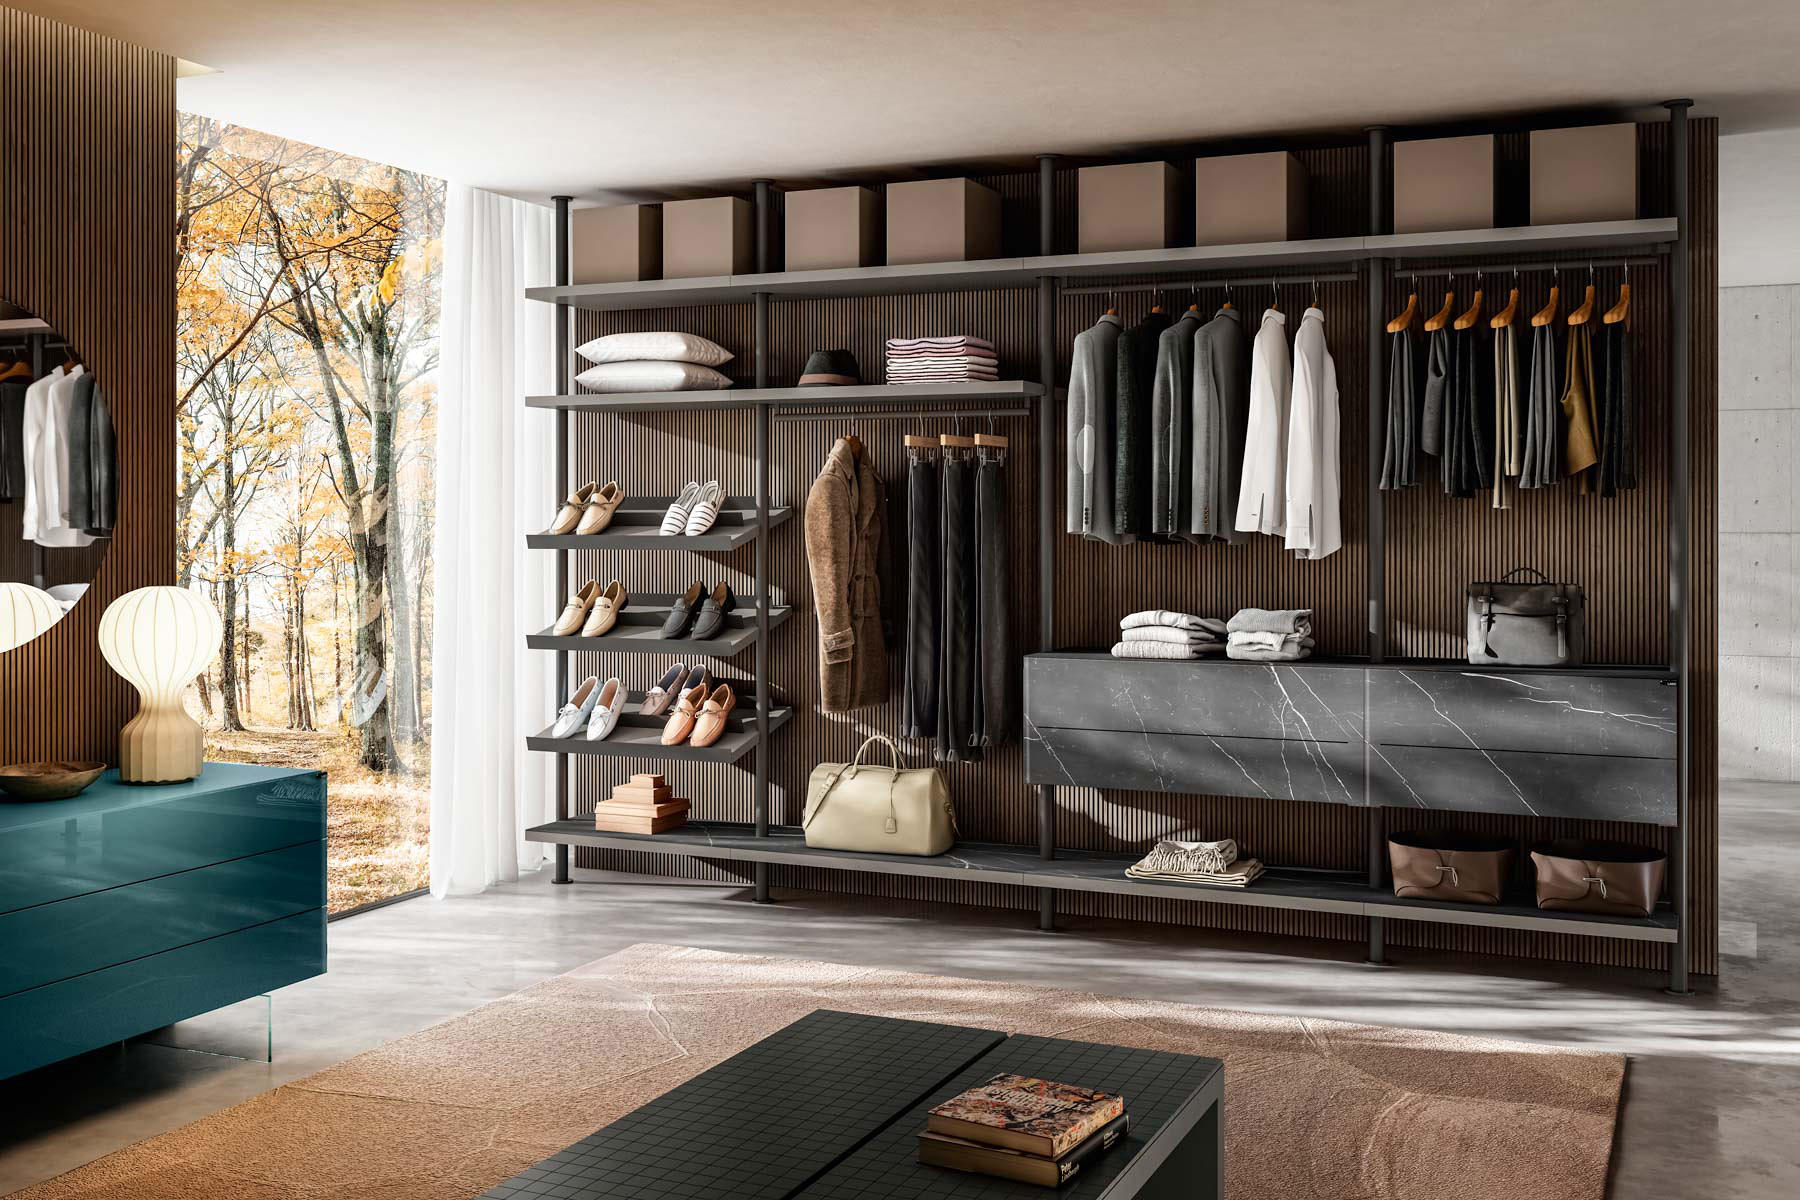 Pros And Cons of Walk in Wardrobe